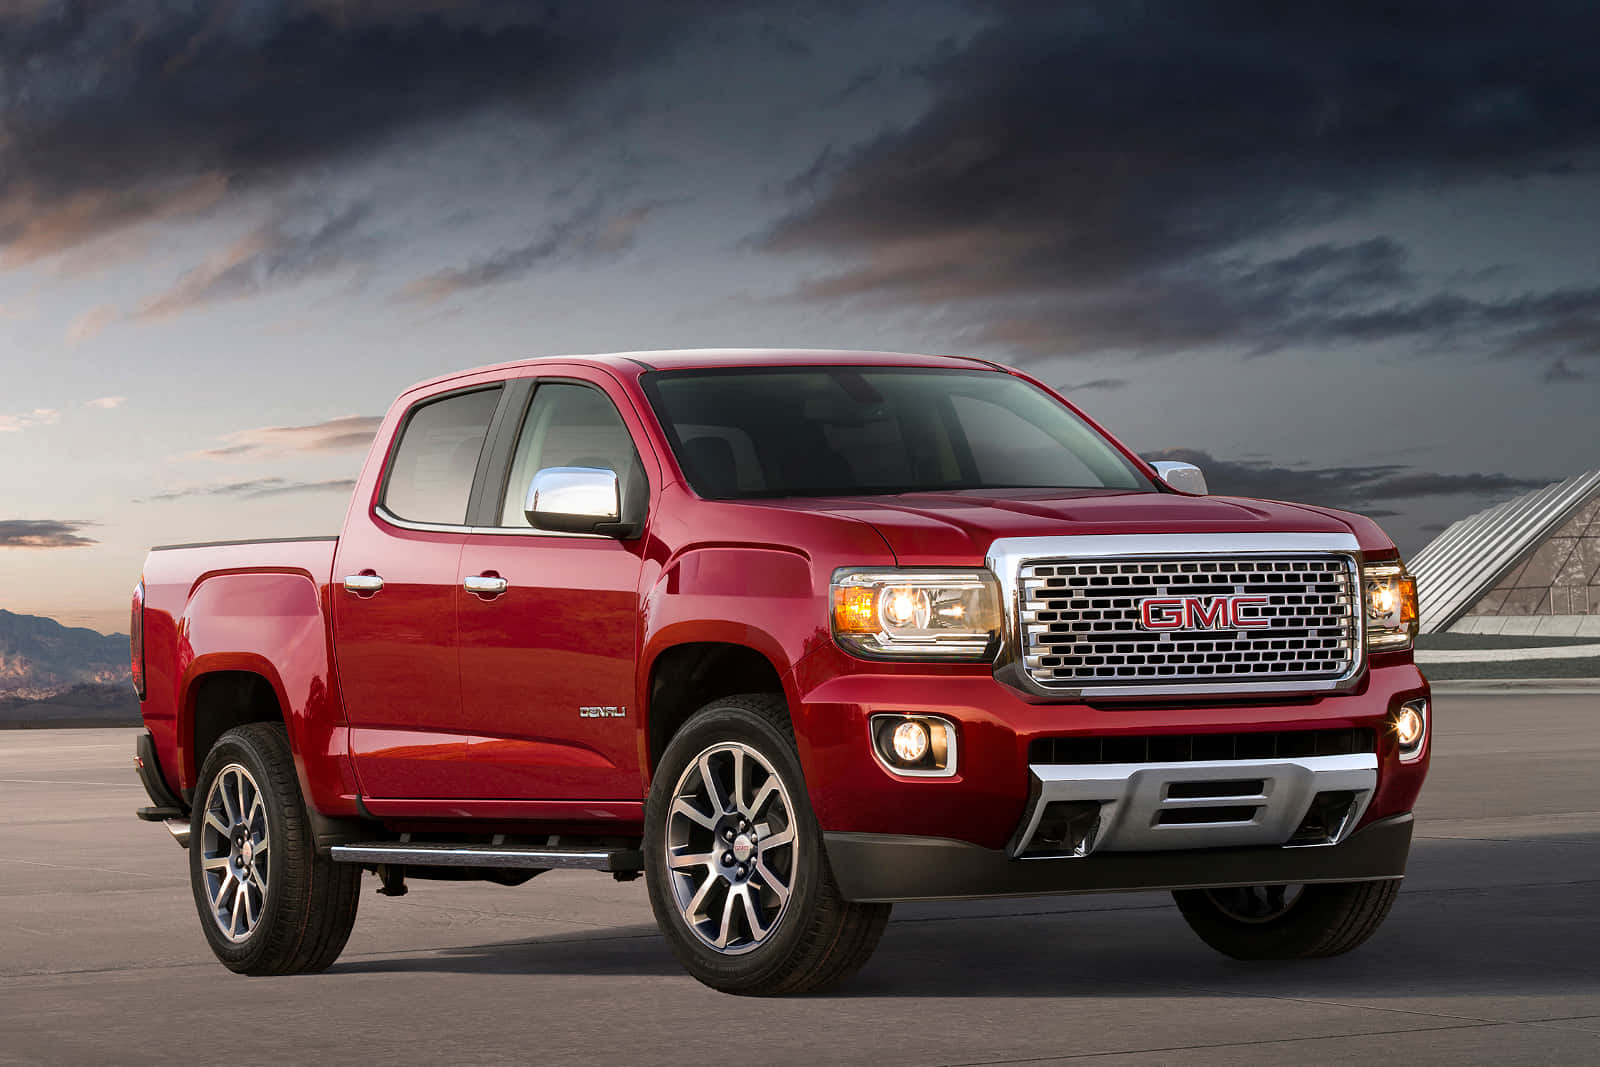 Caption: GMC Canyon - Bold and Versatile Pick-up Truck Wallpaper